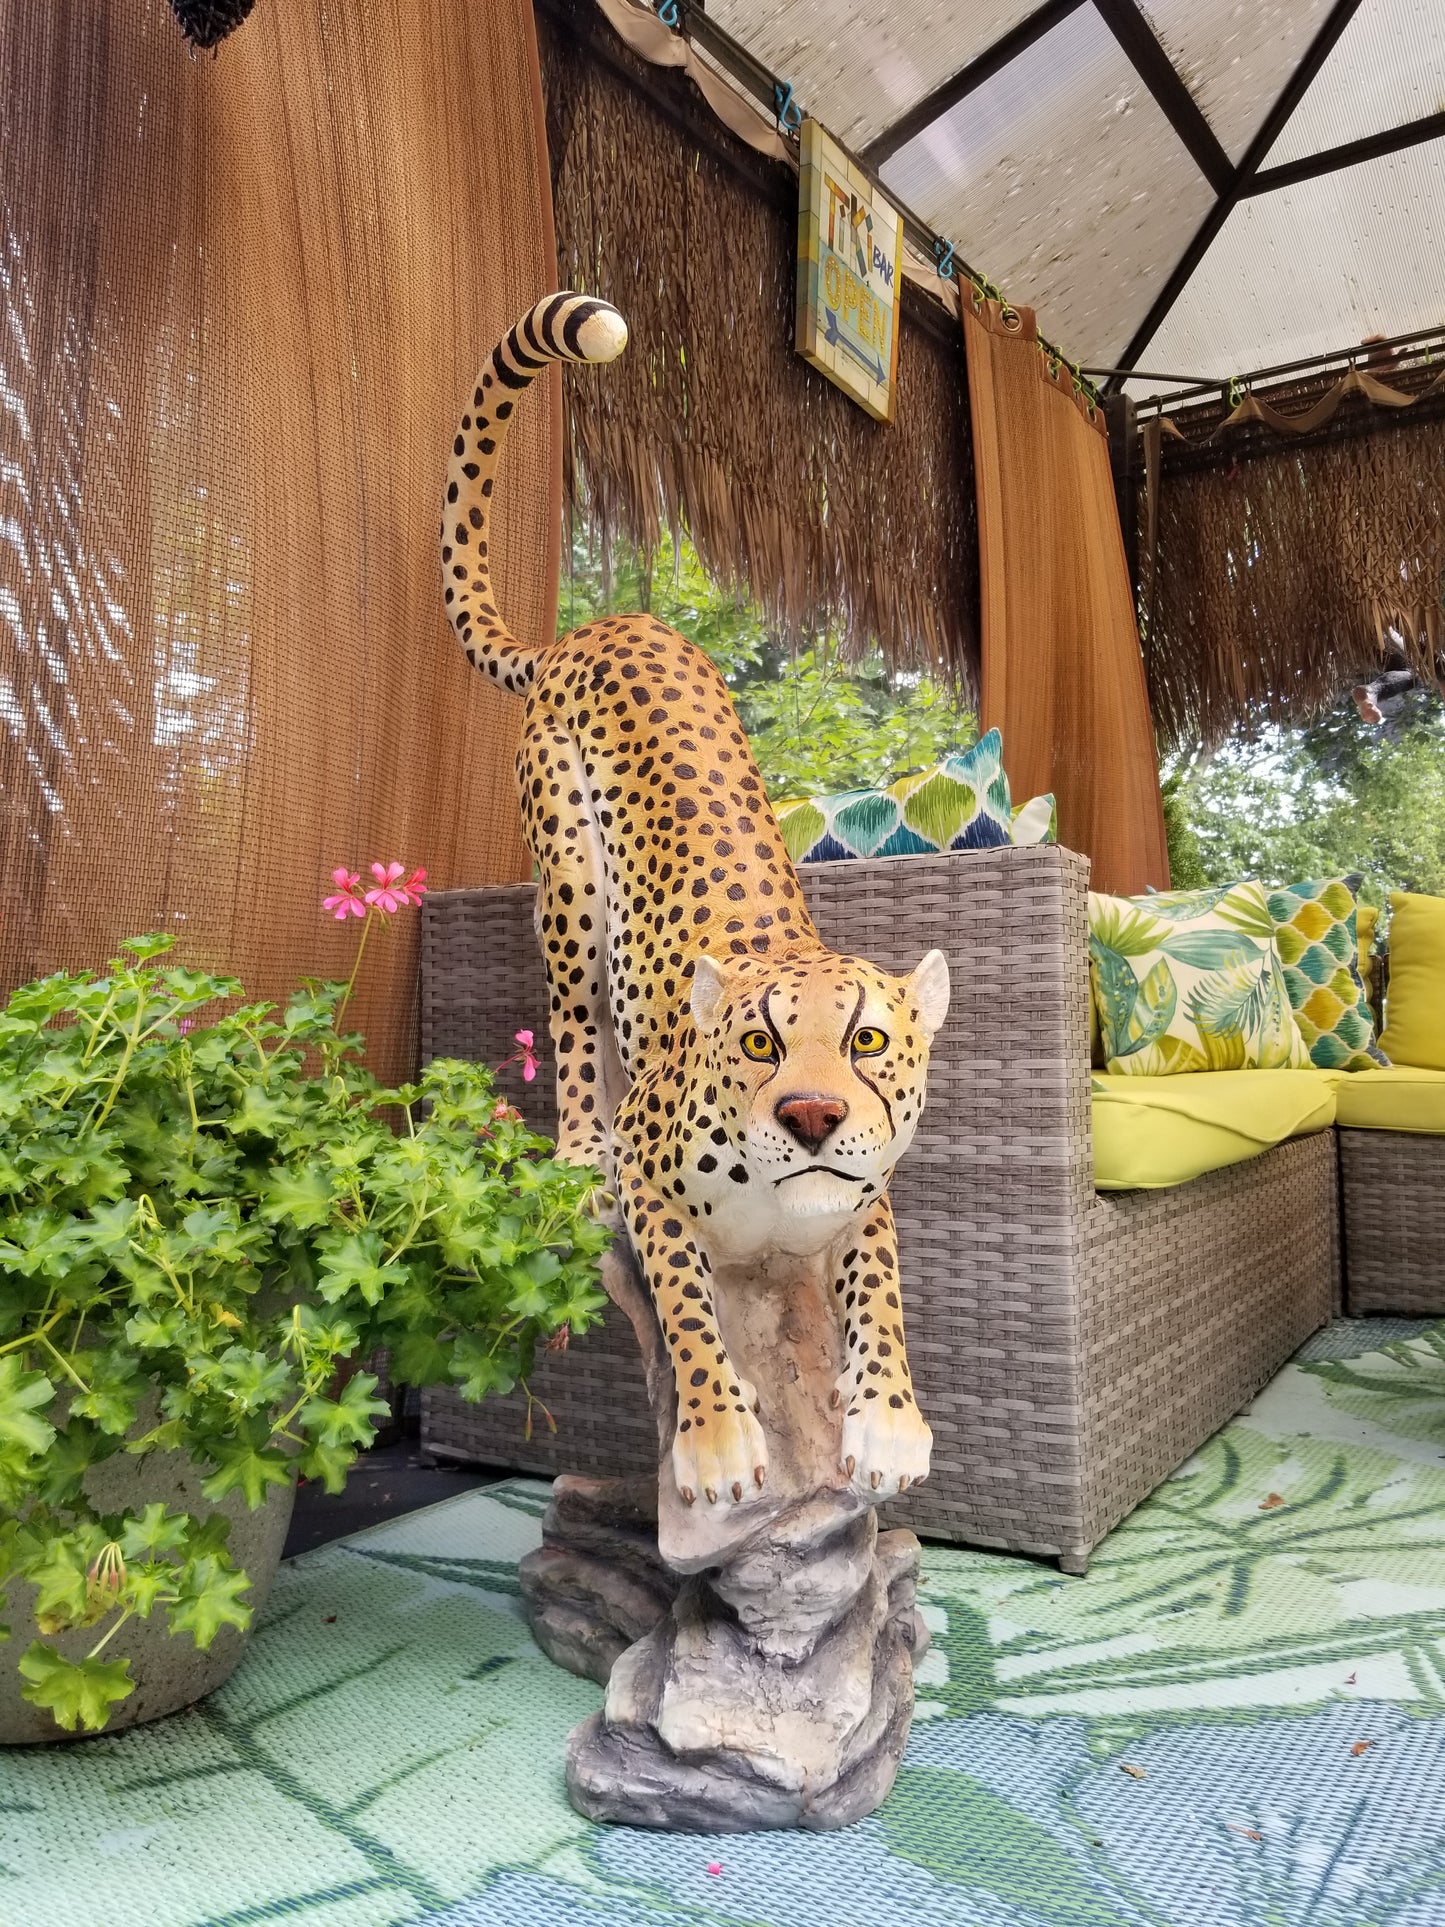 pouncing cheetah statue for sale